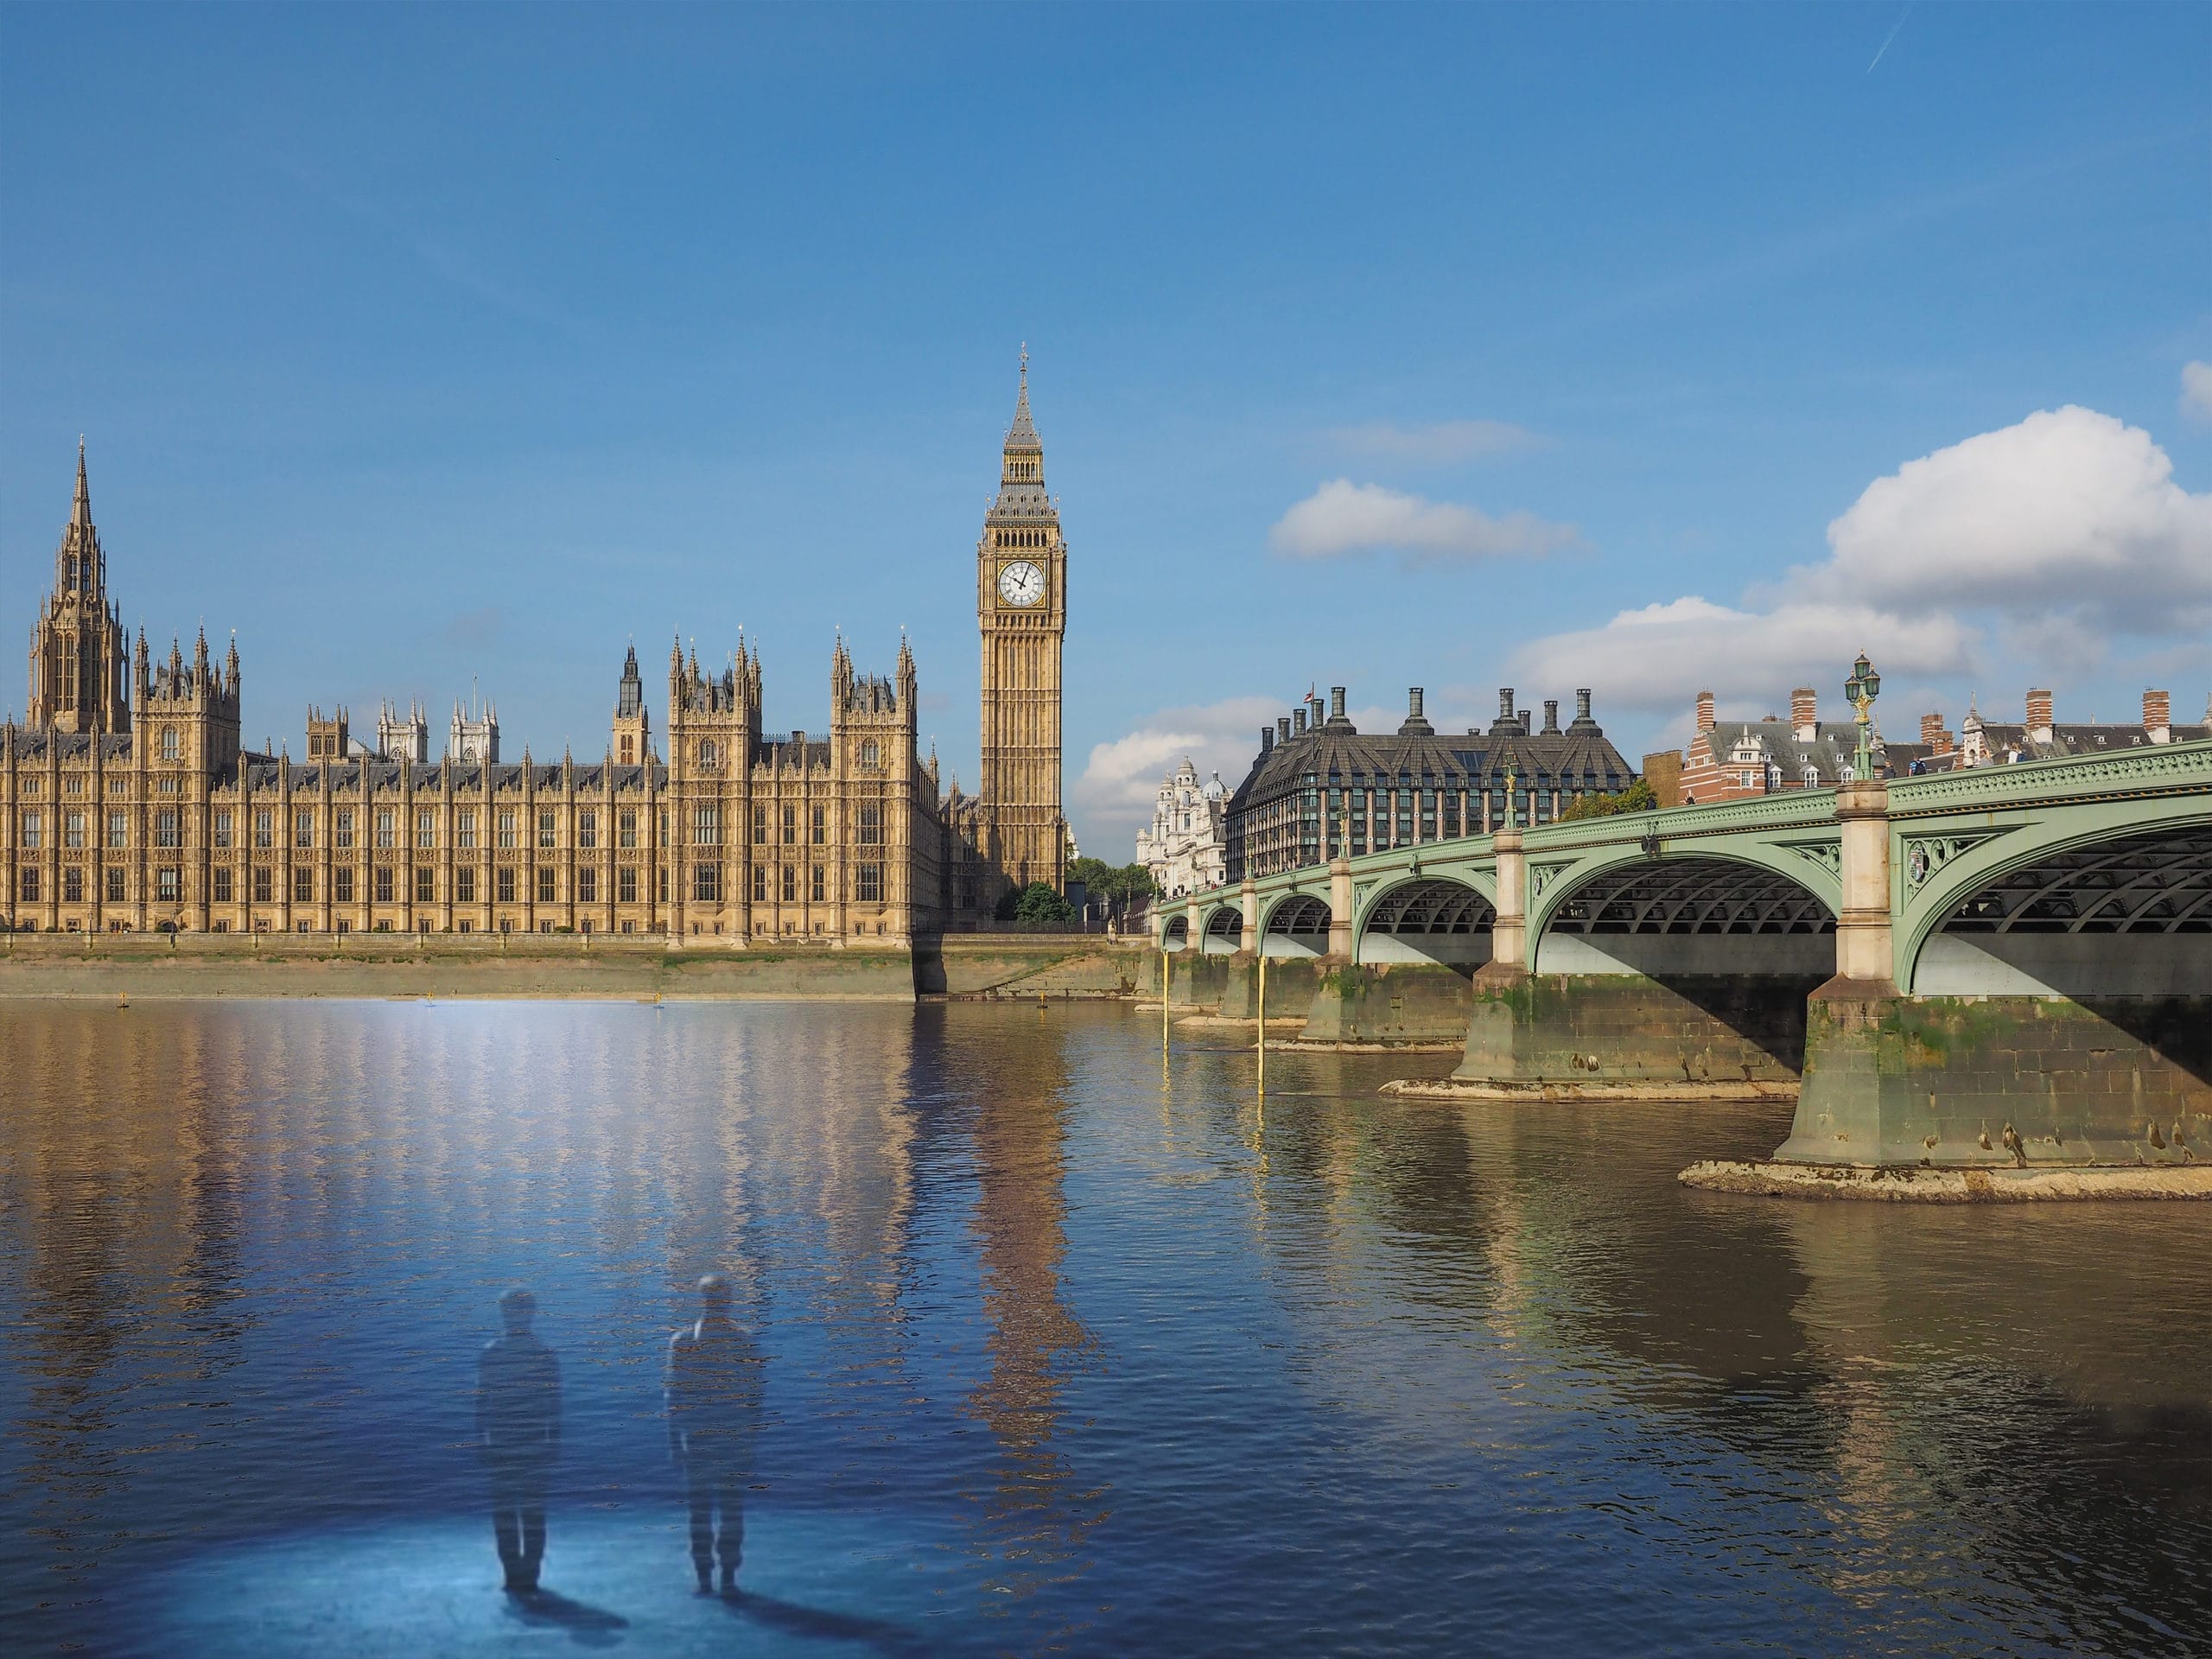 A landscape photograph of London landmarks including Big Ben, the houses of parliament, the River Thames and Westminster Bridge. In the left hand corner stand two silhouetted figures.